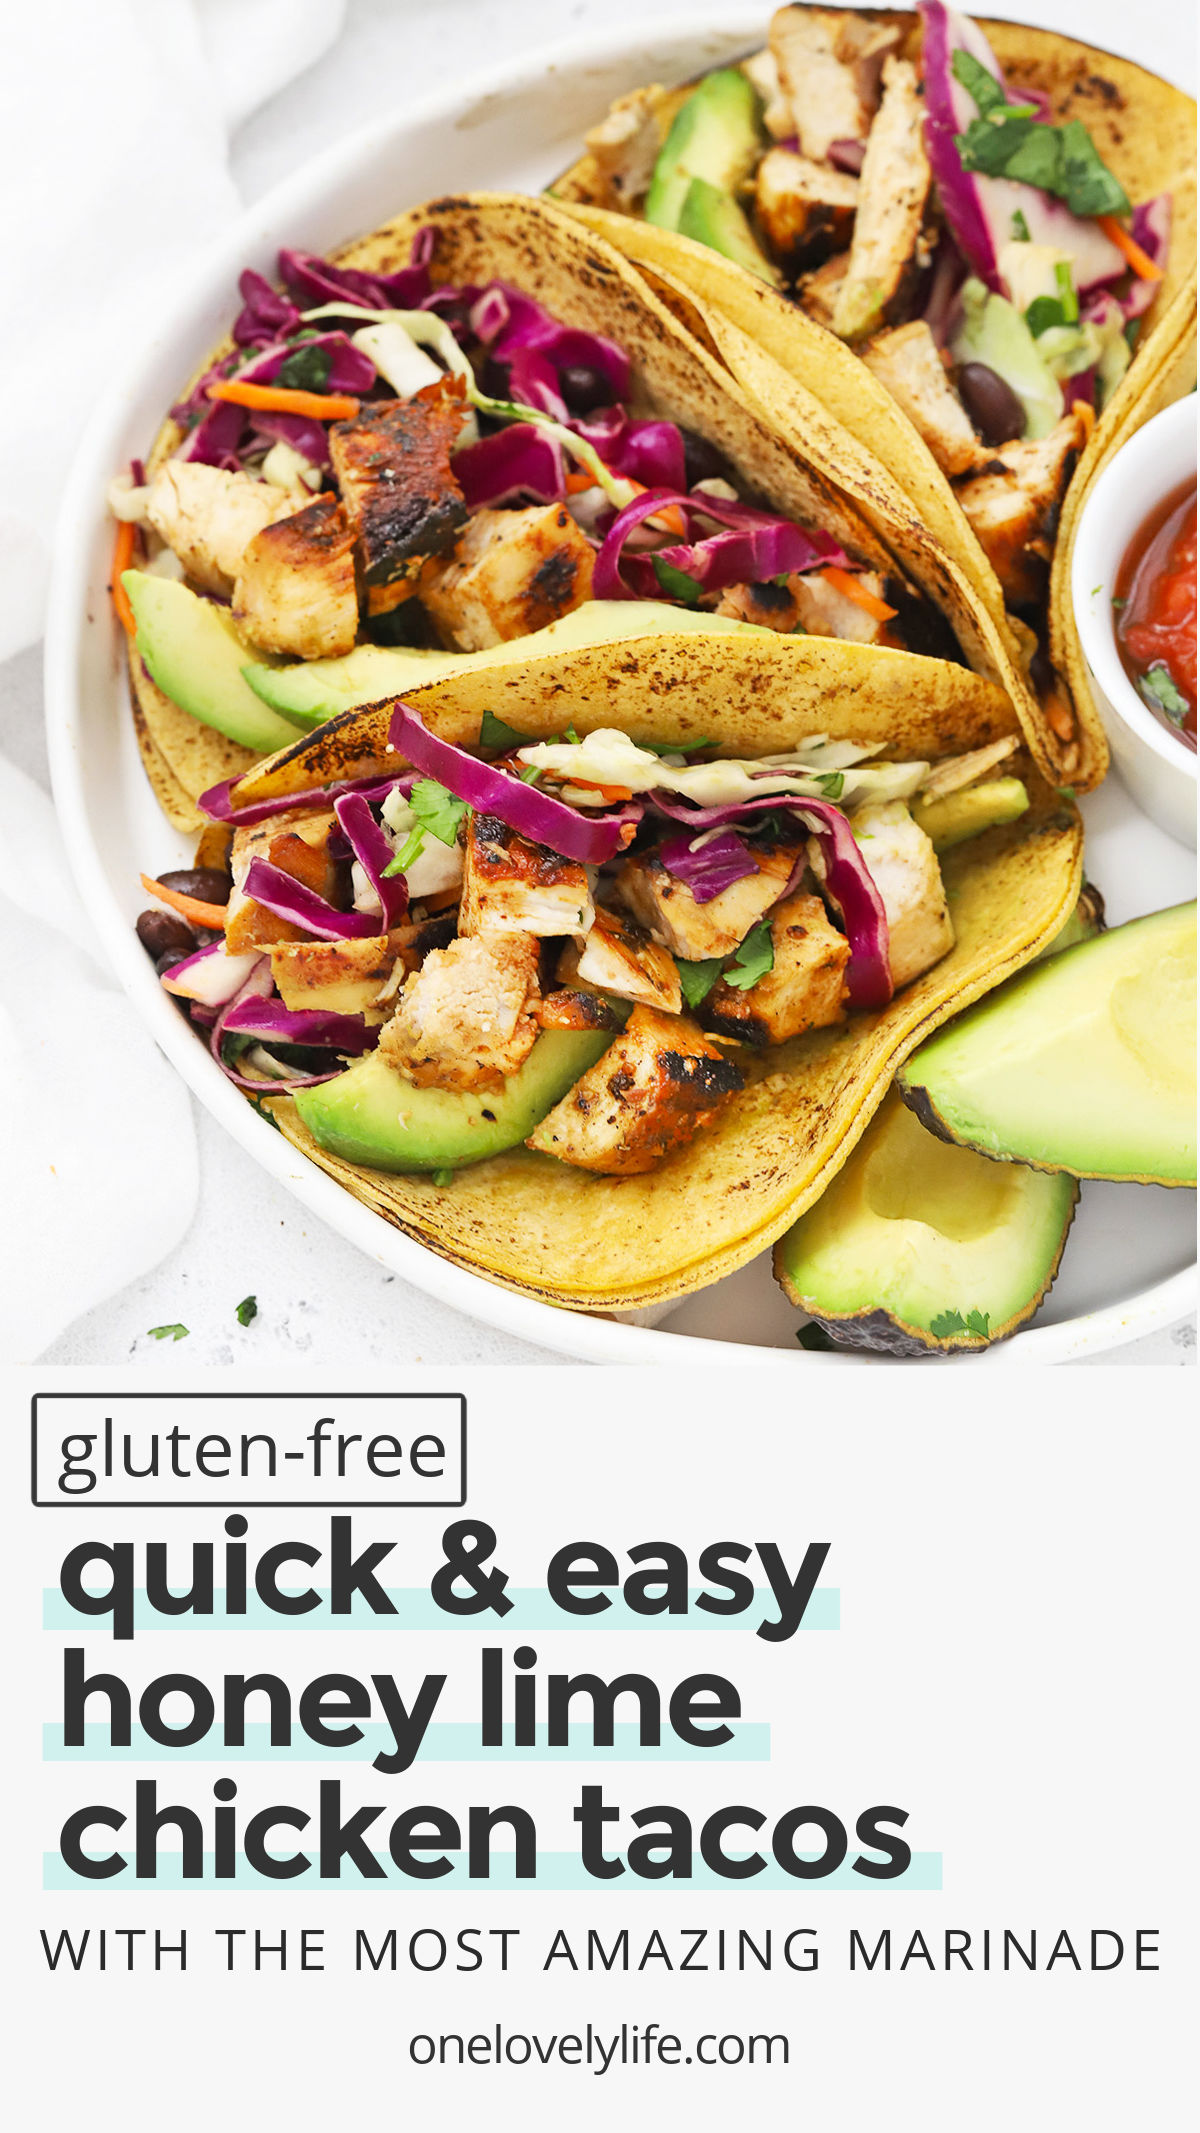 Honey Lime Chicken Tacos - Our honey lime chicken marinade gives these chicken tacos such delicious flavor. Don't miss our favorite toppings to add to these tasty tacos! (Gluten-Free) // Chicken Tacos recipe // Lime Chicken Tacos // Chili Lime Chicken Tacos // healthy chicken tacos // the best chicken tacos // grilled chicken tacos